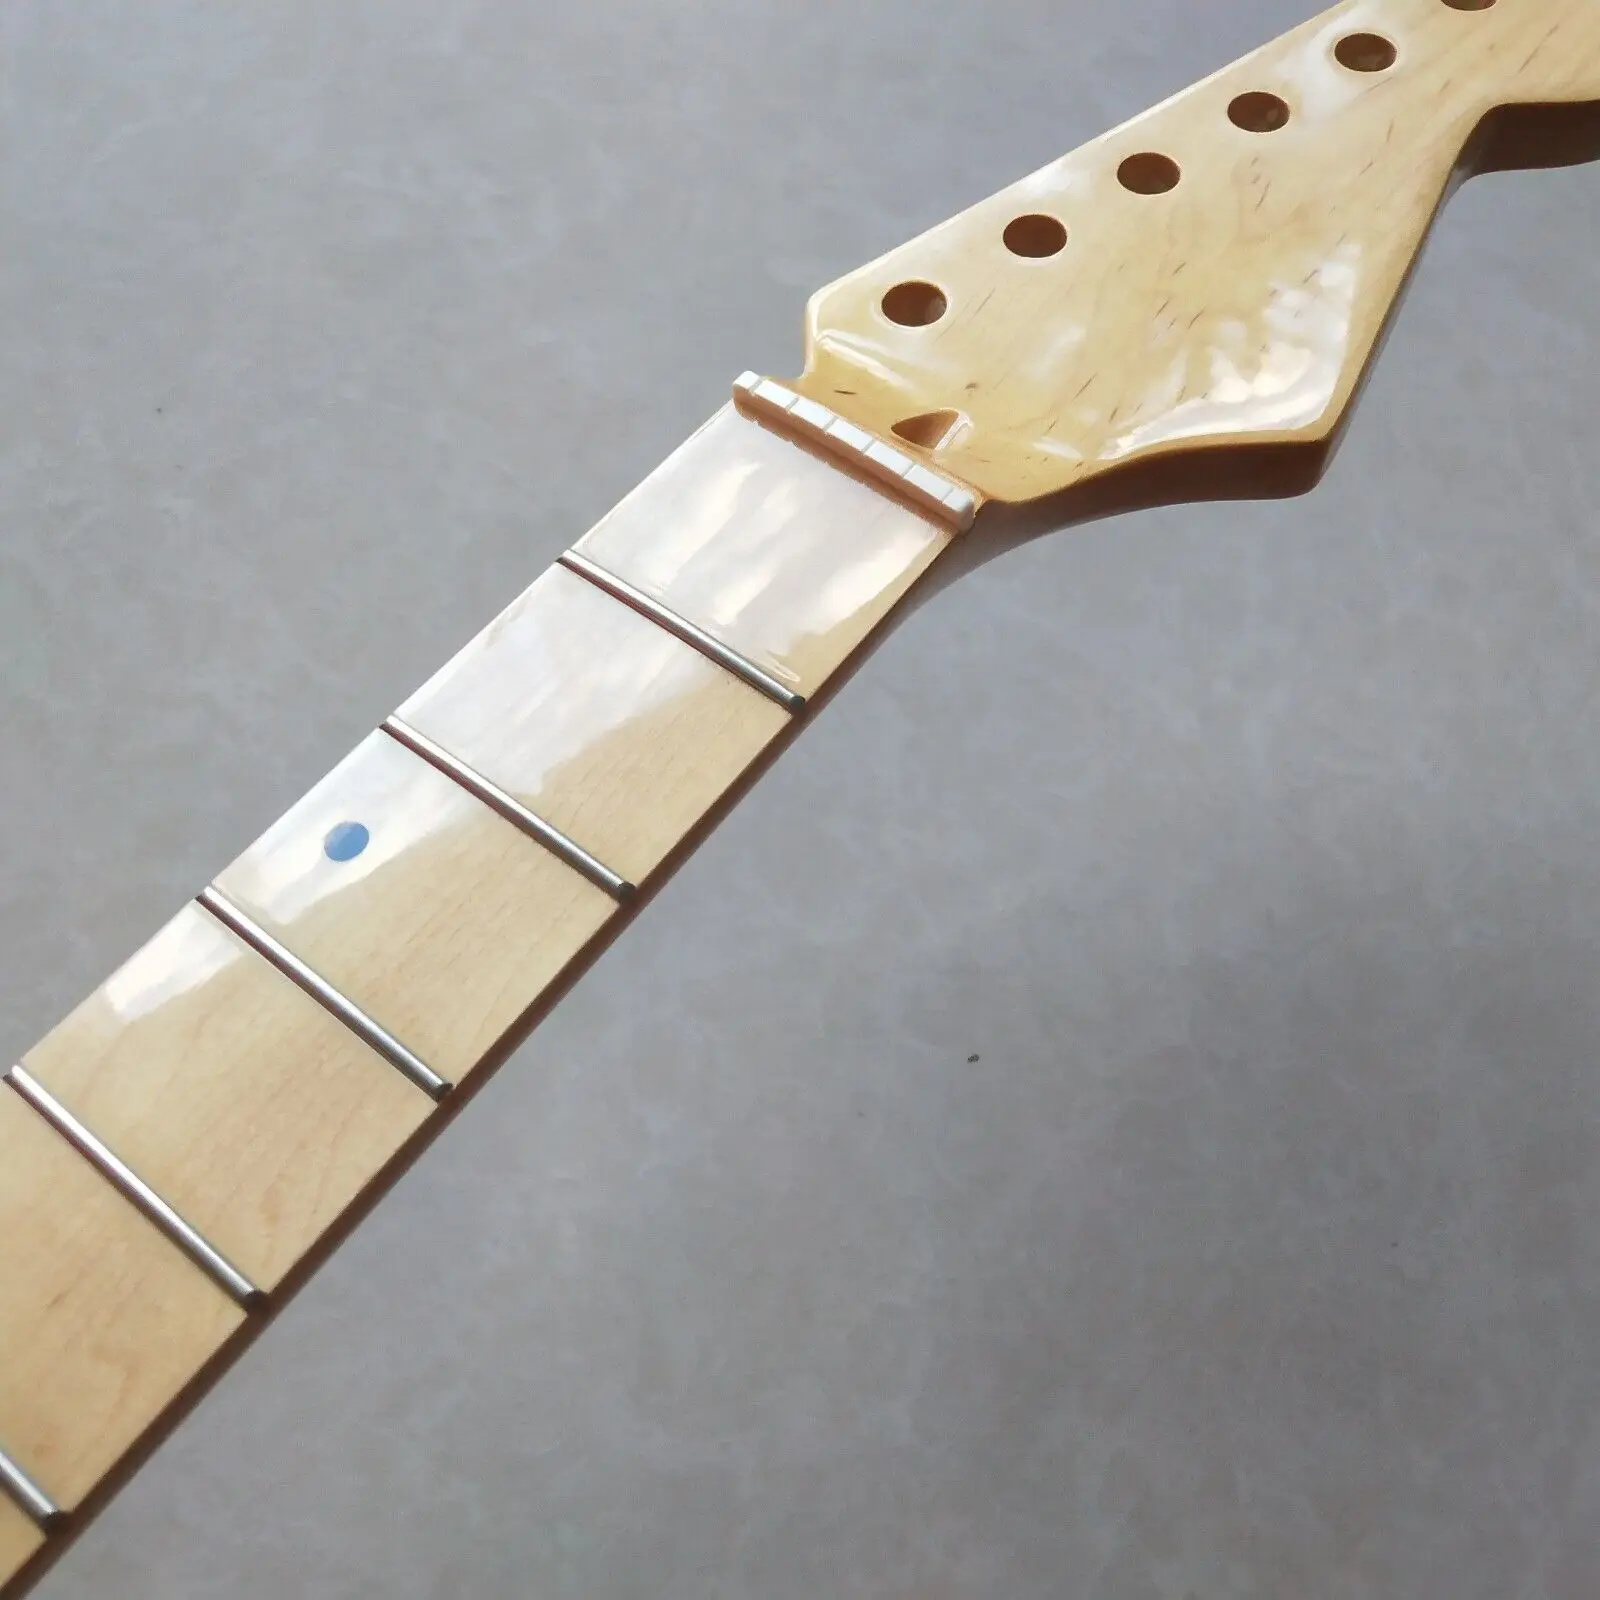 Electric guitar neck 22 Fret 25.5inch Maple Fretboard Side Dot Replacement parts enlarge